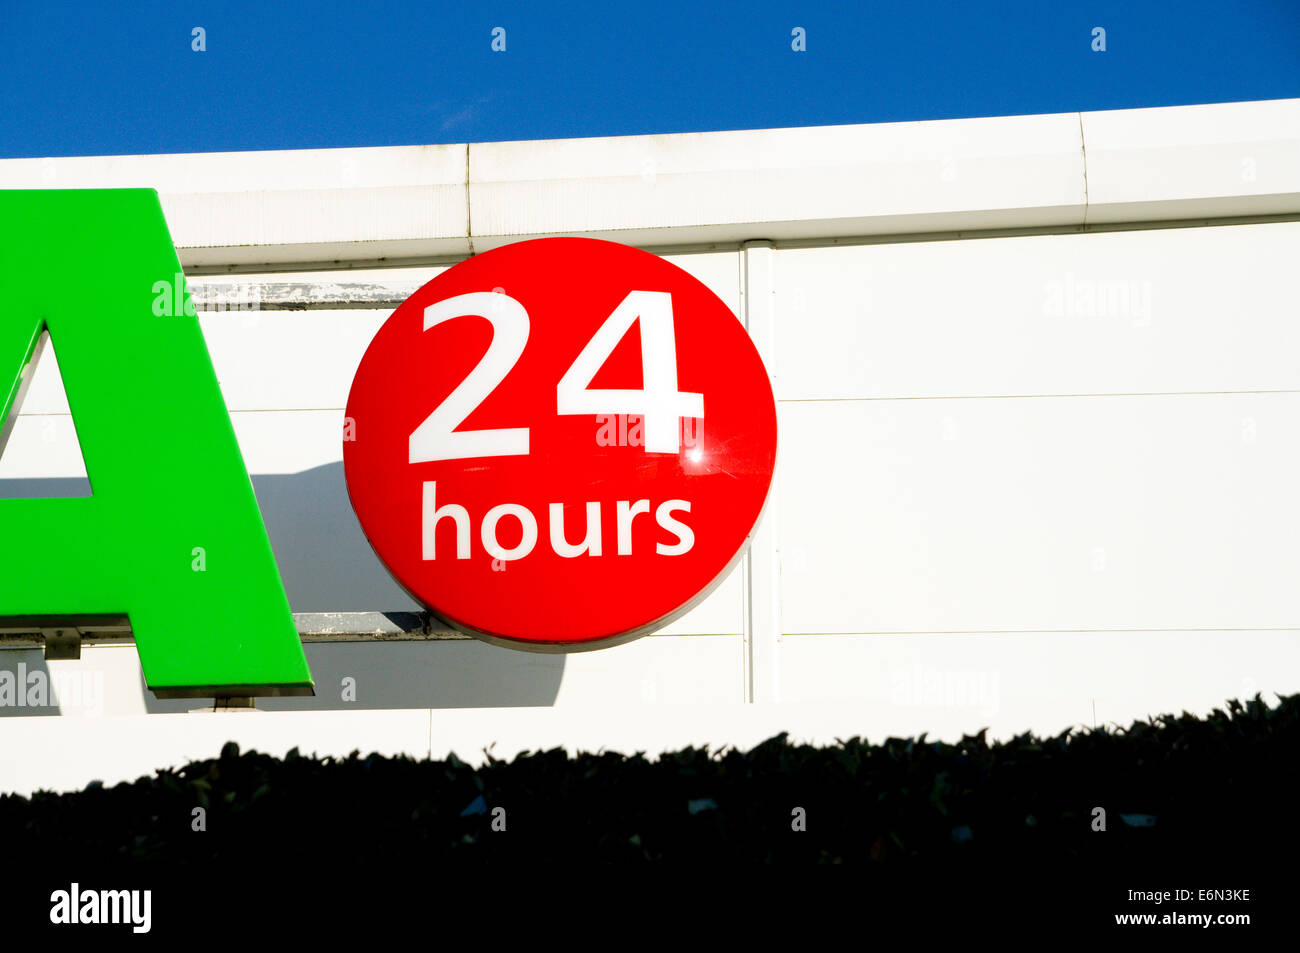 24 Hour shop opening sign, Asda Store, Leckwith, Cardiff, Wales. Stock Photo